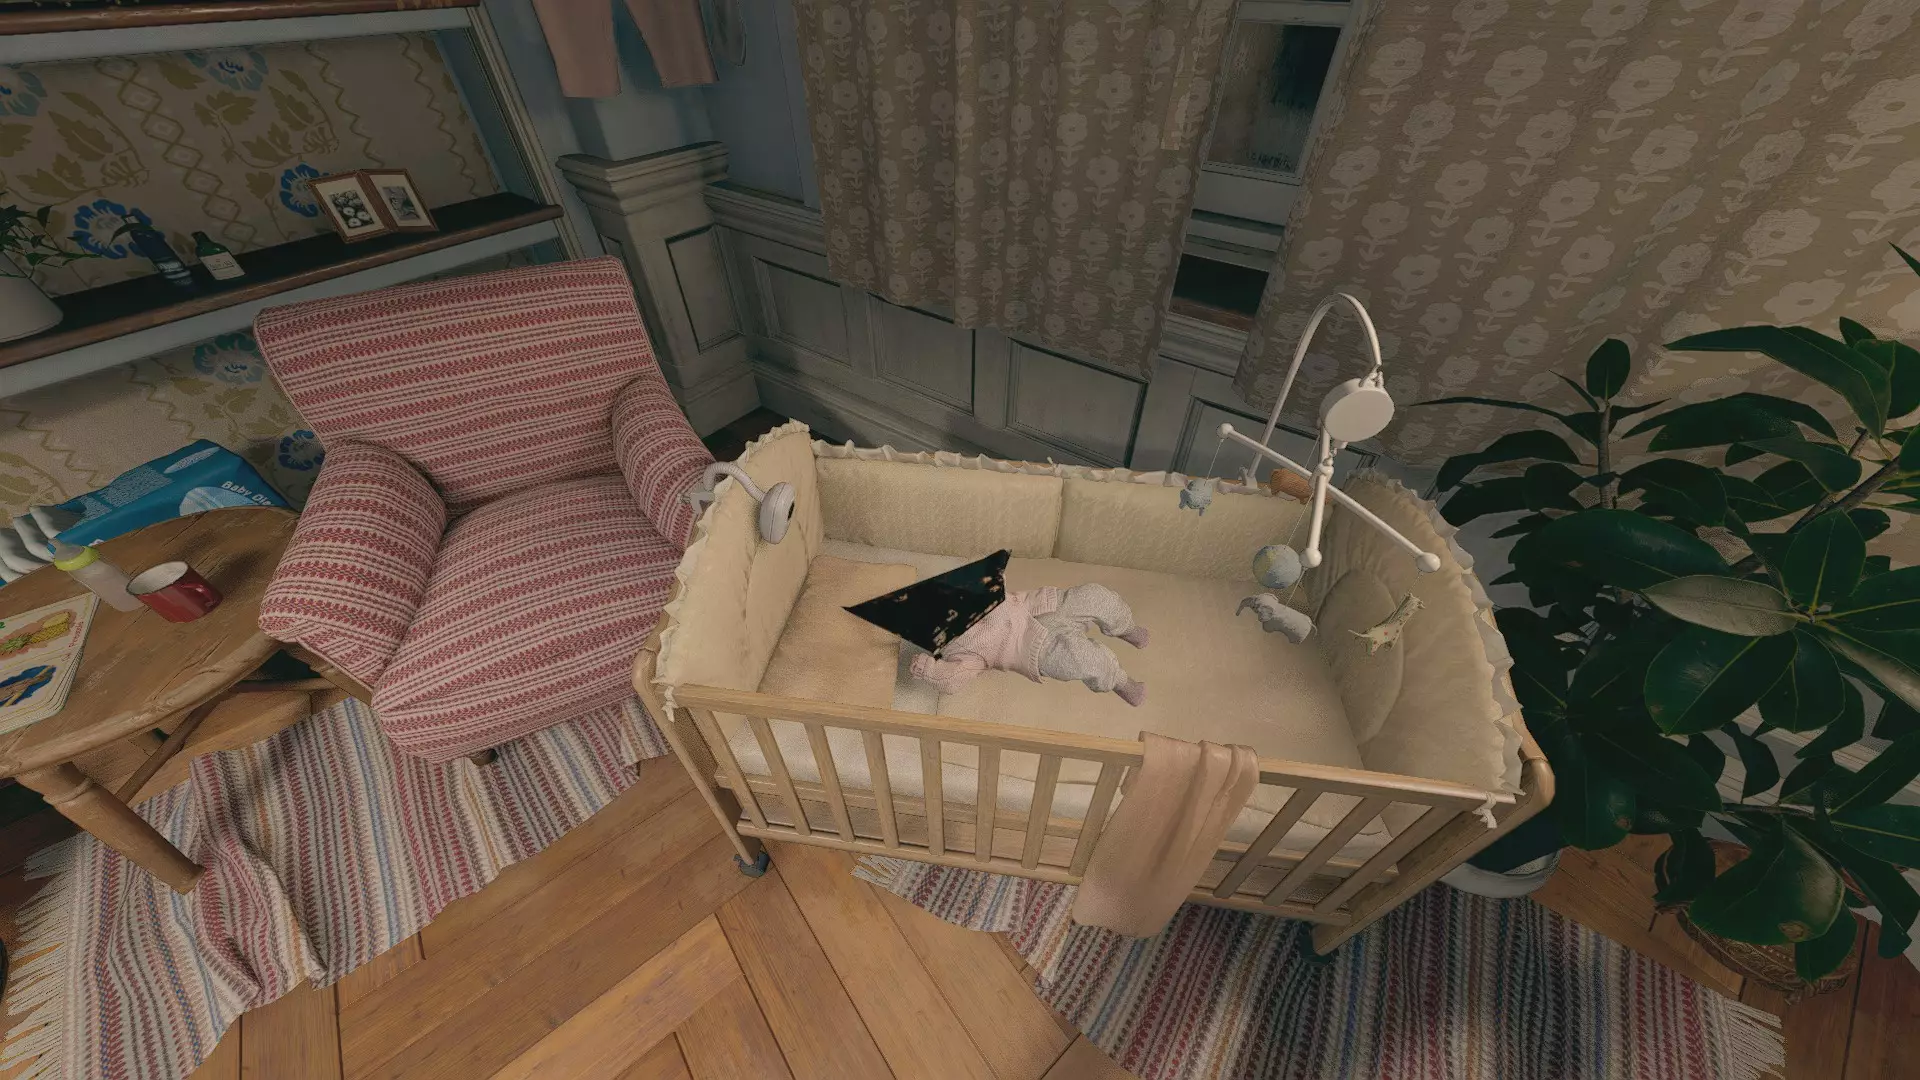 Pyramid Head Rose in her crib in 'Resident Evil Village' /